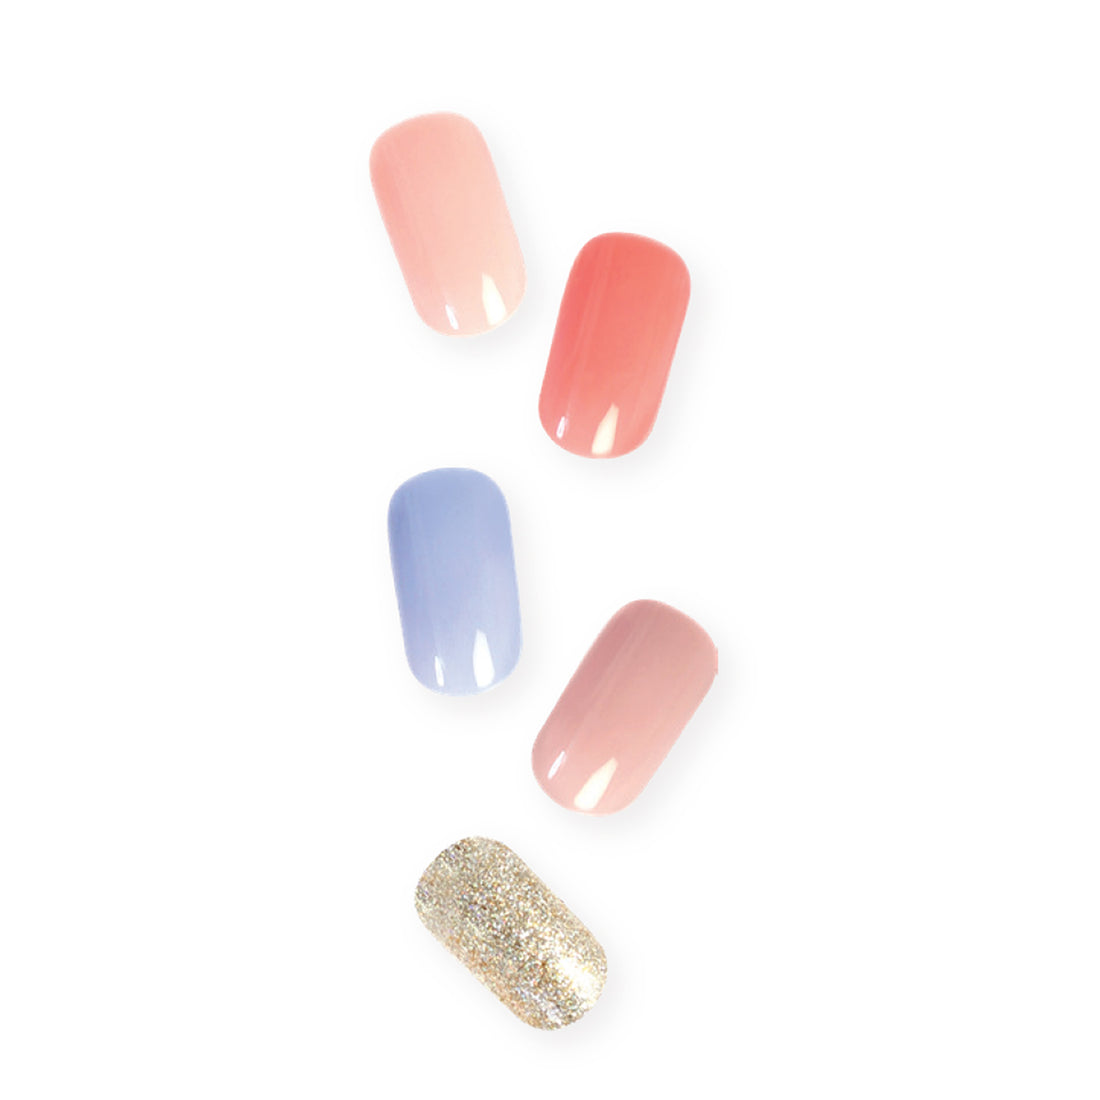 Press On Nails with Glue - Short Round Nails by Poshmellow (Value Pack)